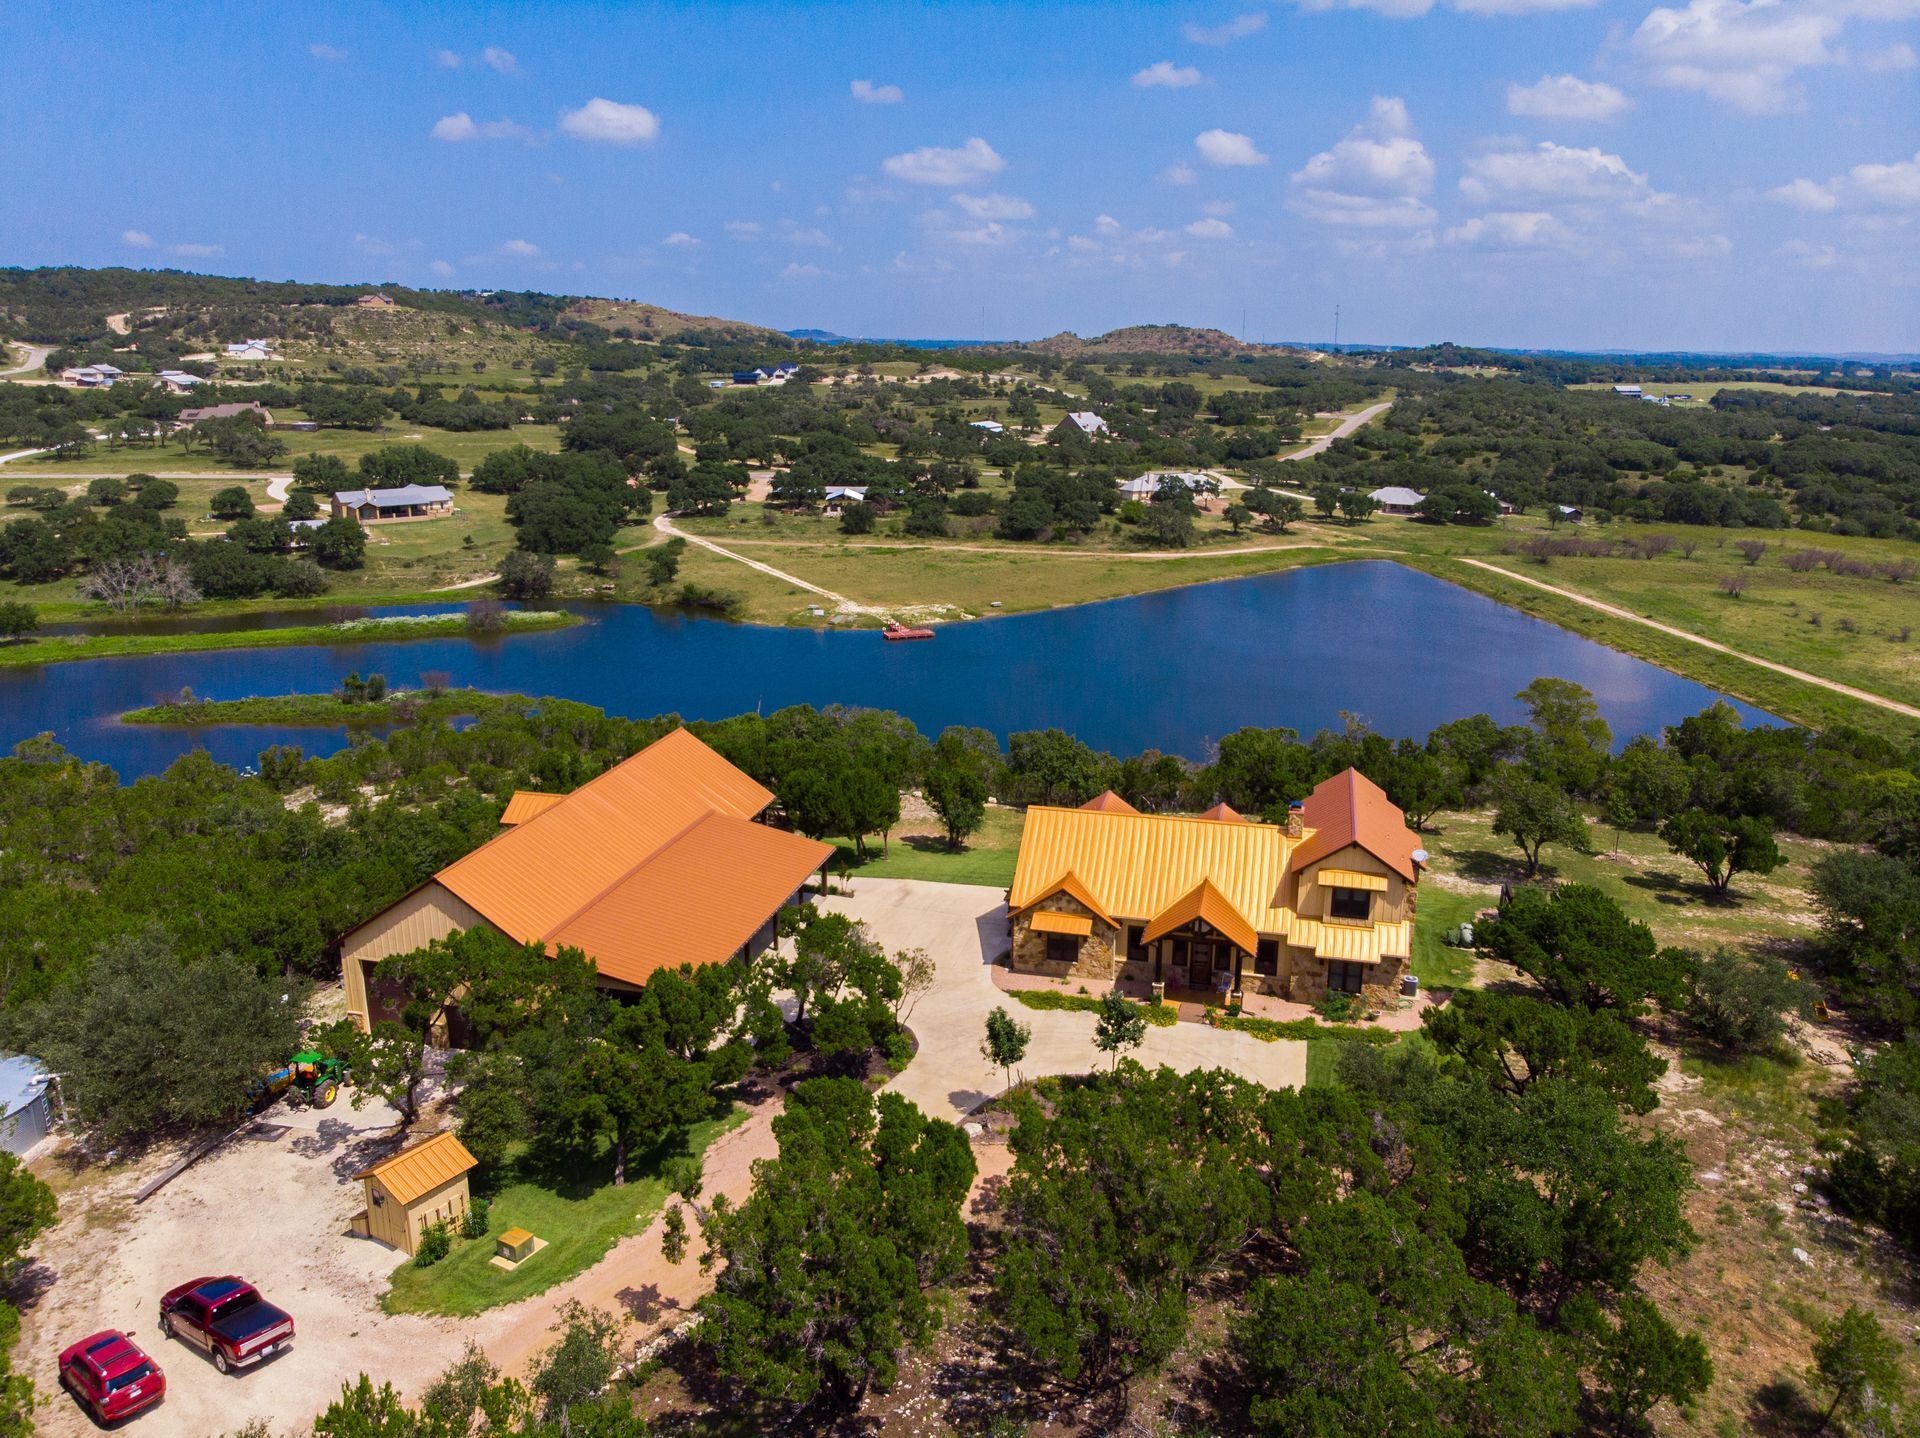 An aerial view of a large house surrounded by trees and a lake in Texas.